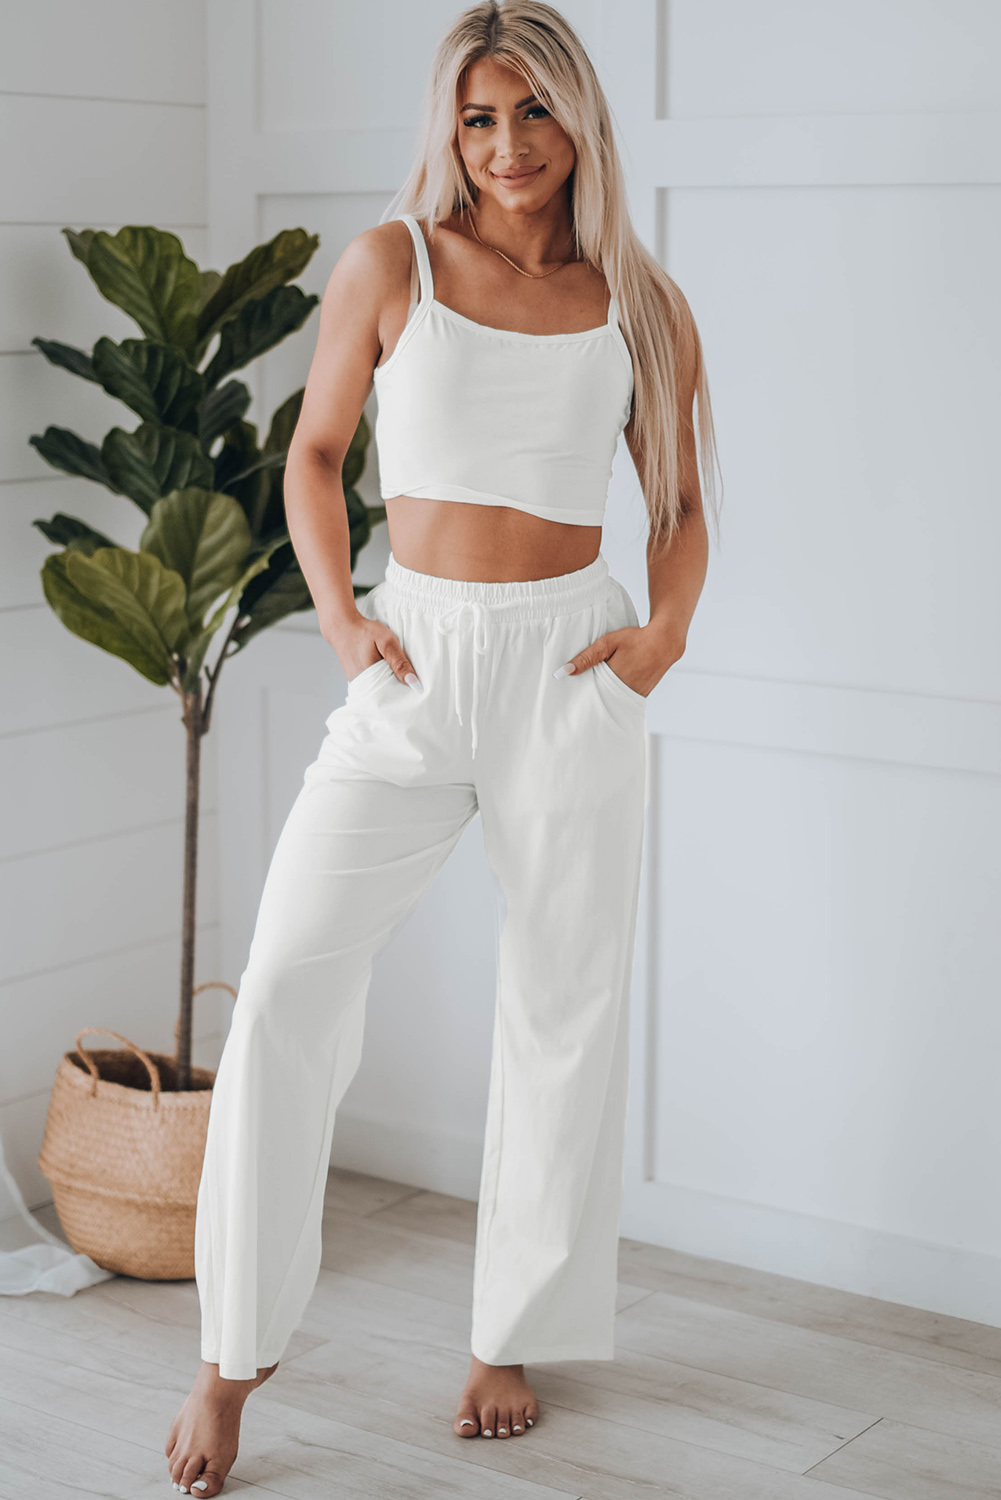 Dropshipping White Casual Cropped Cami Top & High Waist PANTS Set